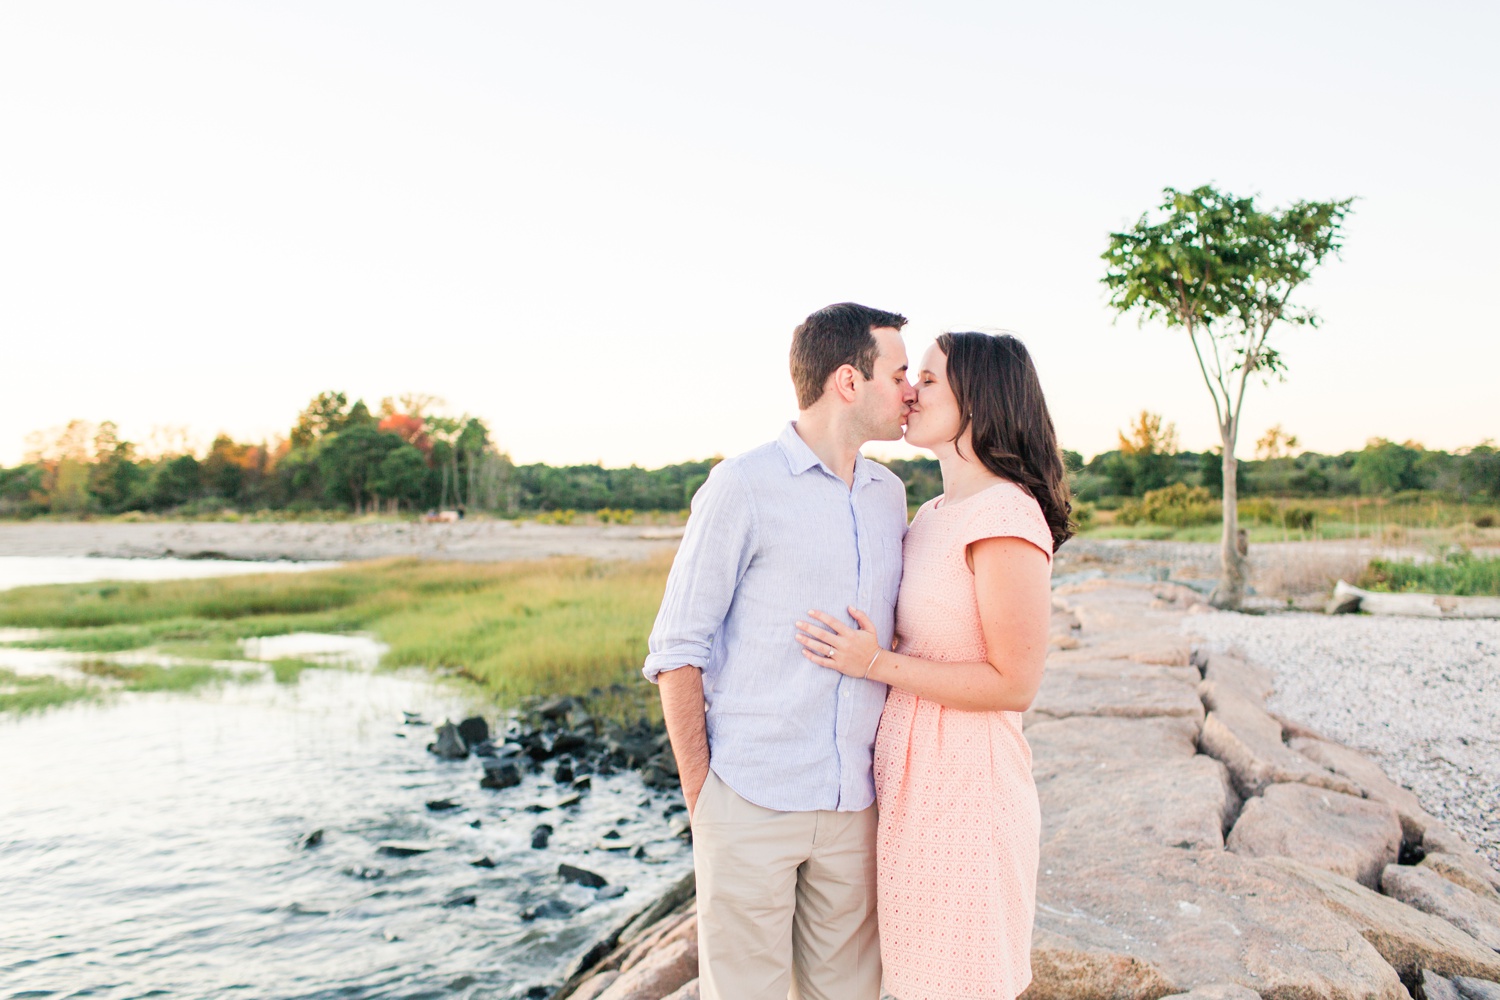 About — Connecticut & New York Wedding, Engagement, & Anniversary  Photographer